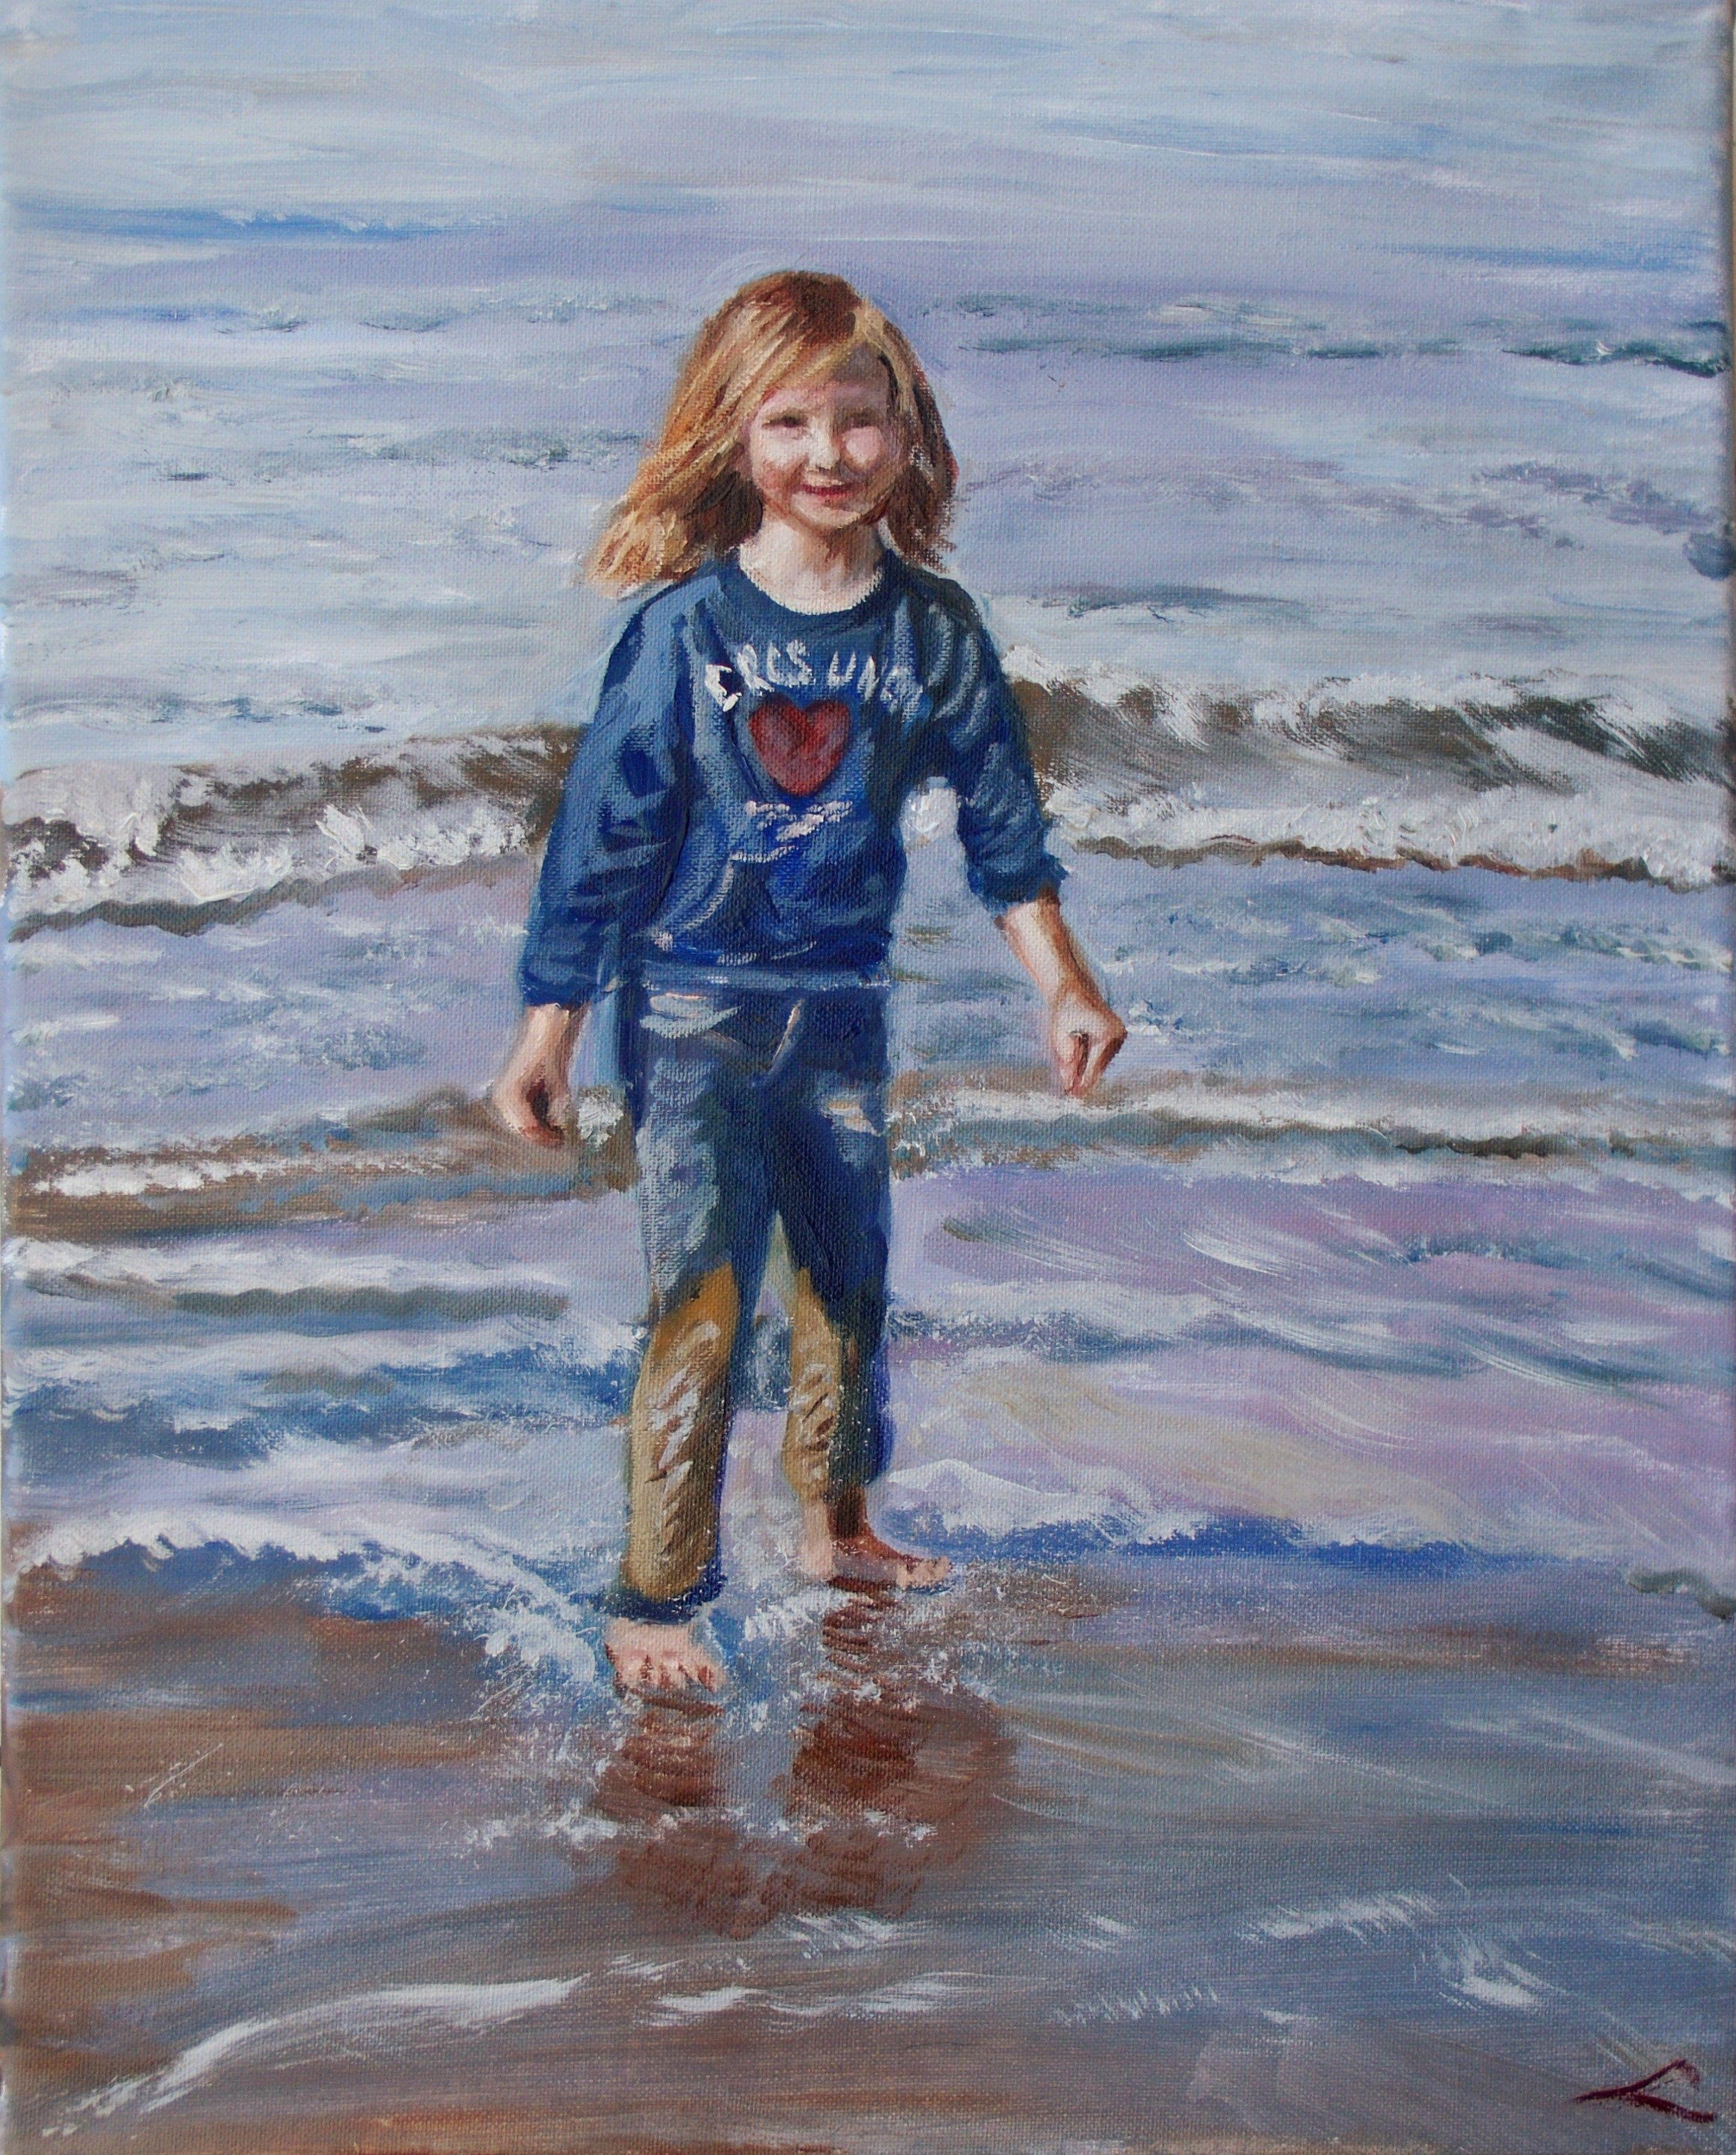 Girl at the sea. Alla prima oil painting with few final tuches when dry. Beach Paintings always inspire thoughts of holidays, long walks, warm breezes and relaxation. beach and ocean themed paintings that will bring the outdoors inside and brighten